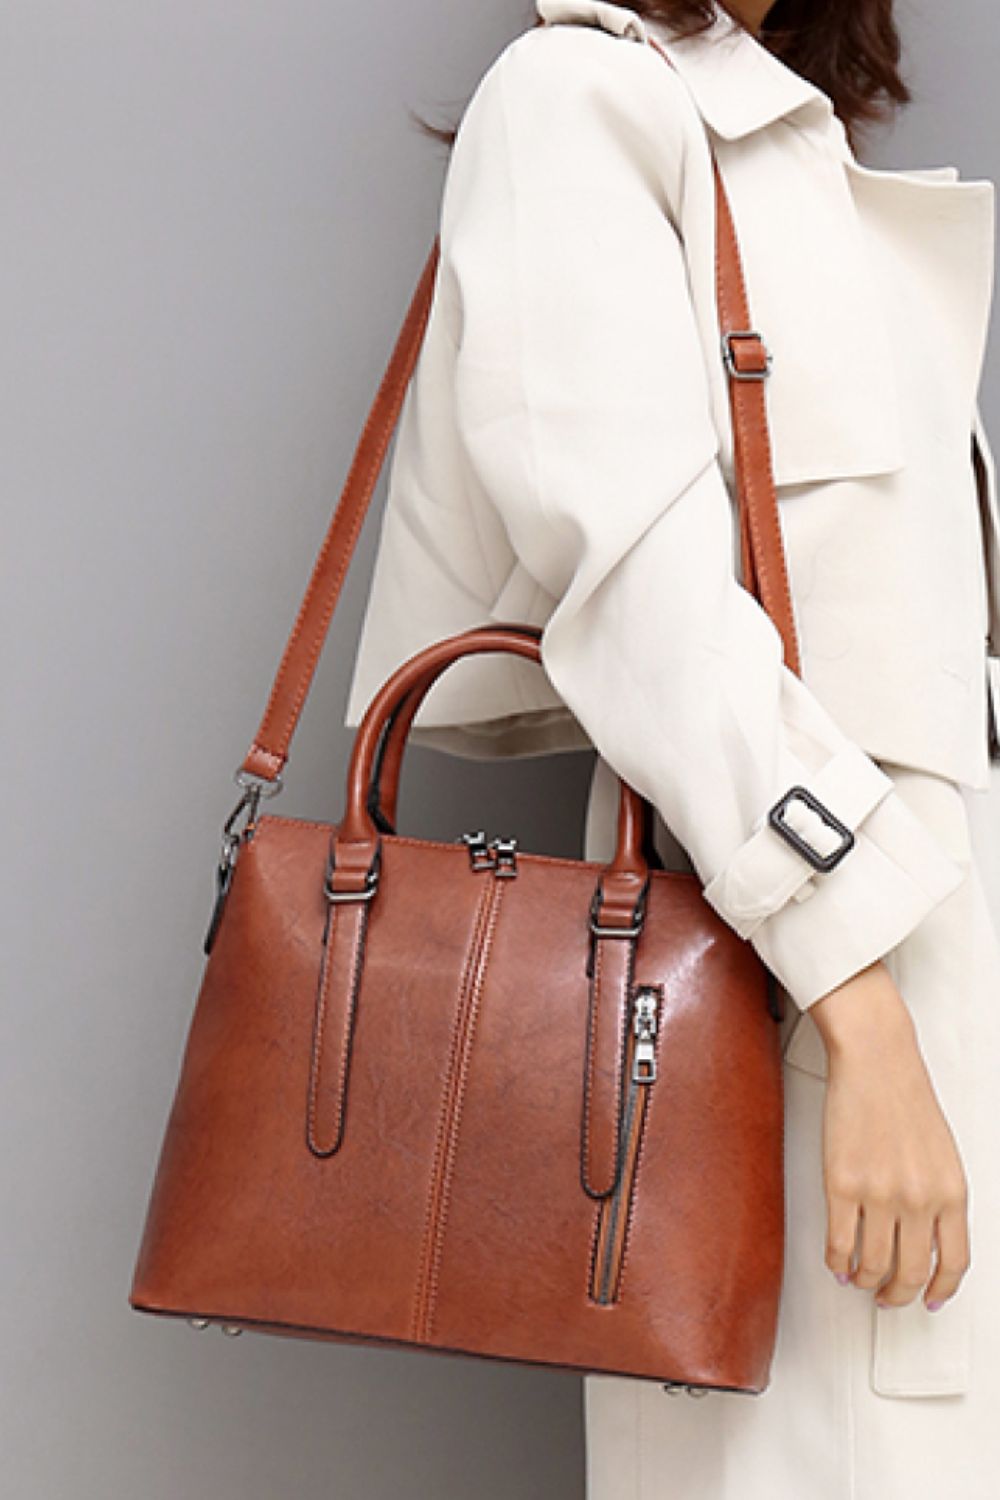 Apothecarry Leather Satchel in Chestnut